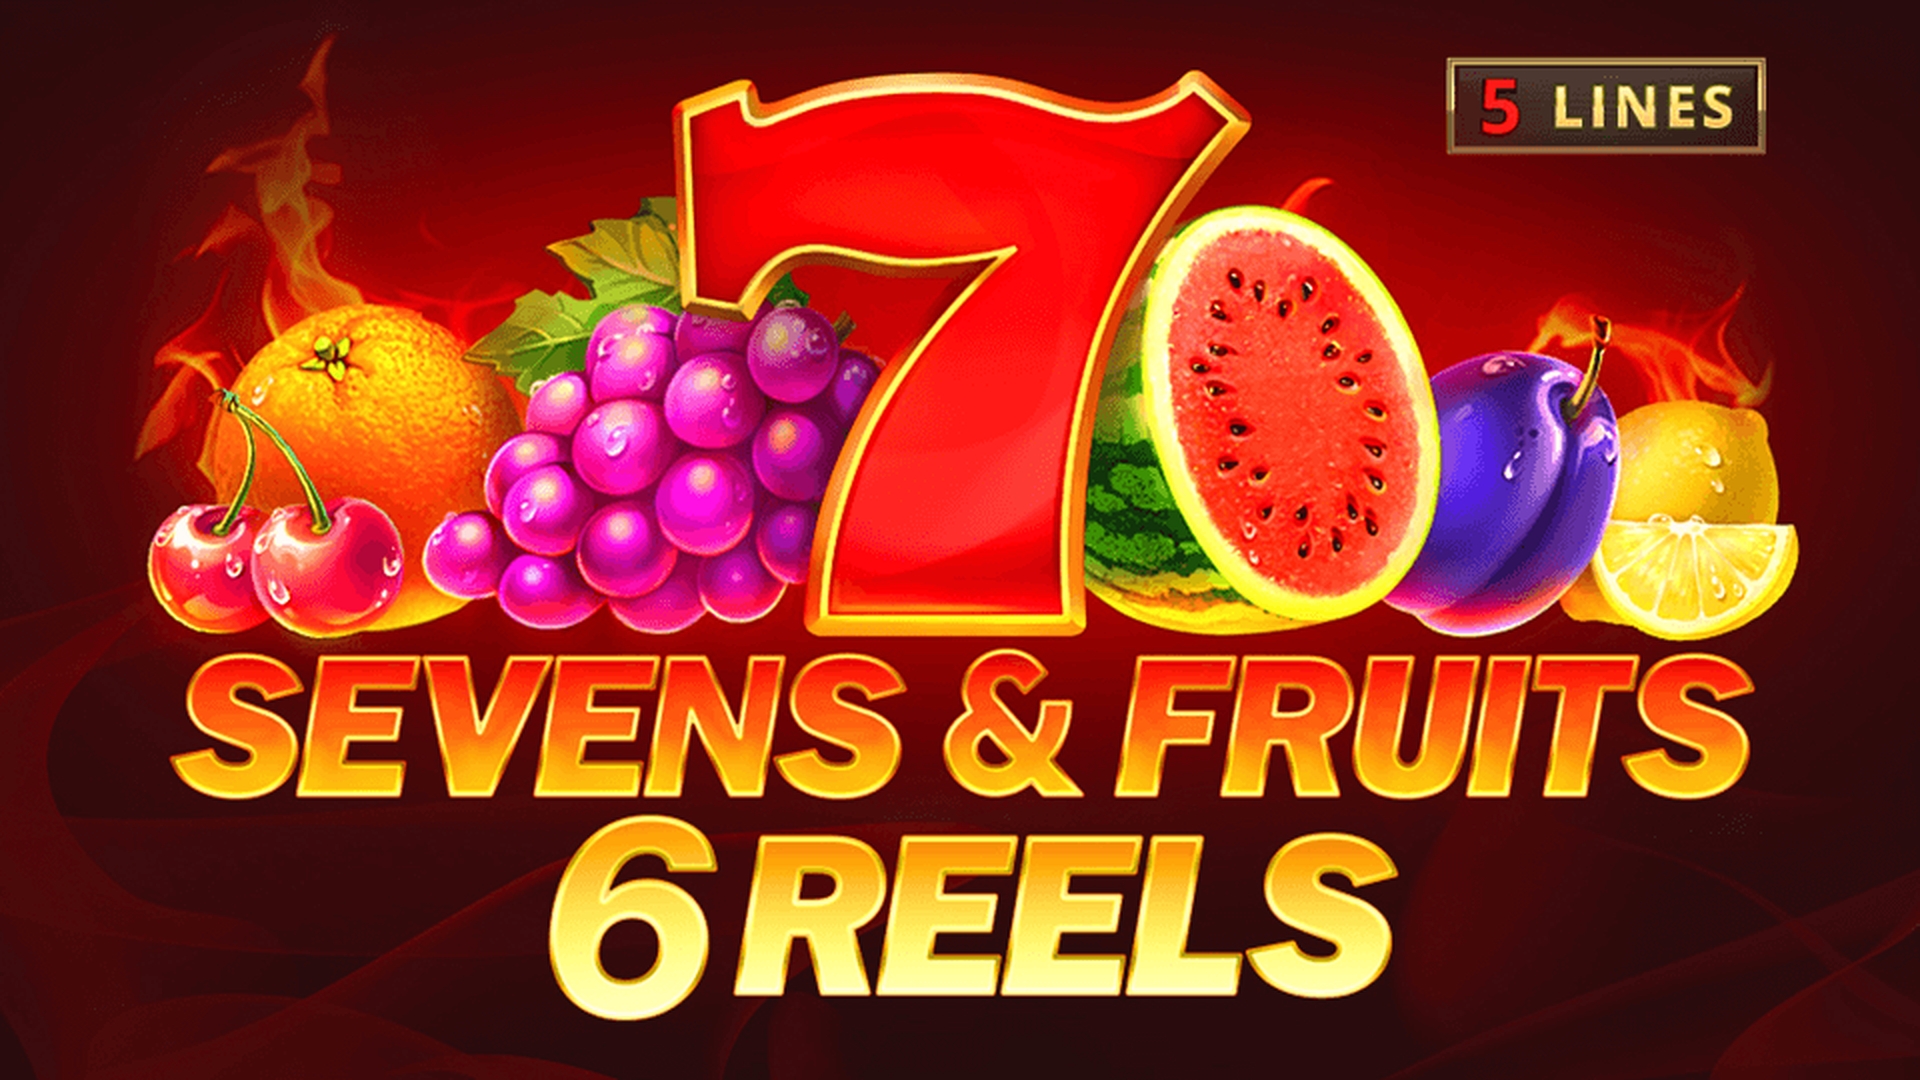 Sevens and Fruits: 6 Reels demo